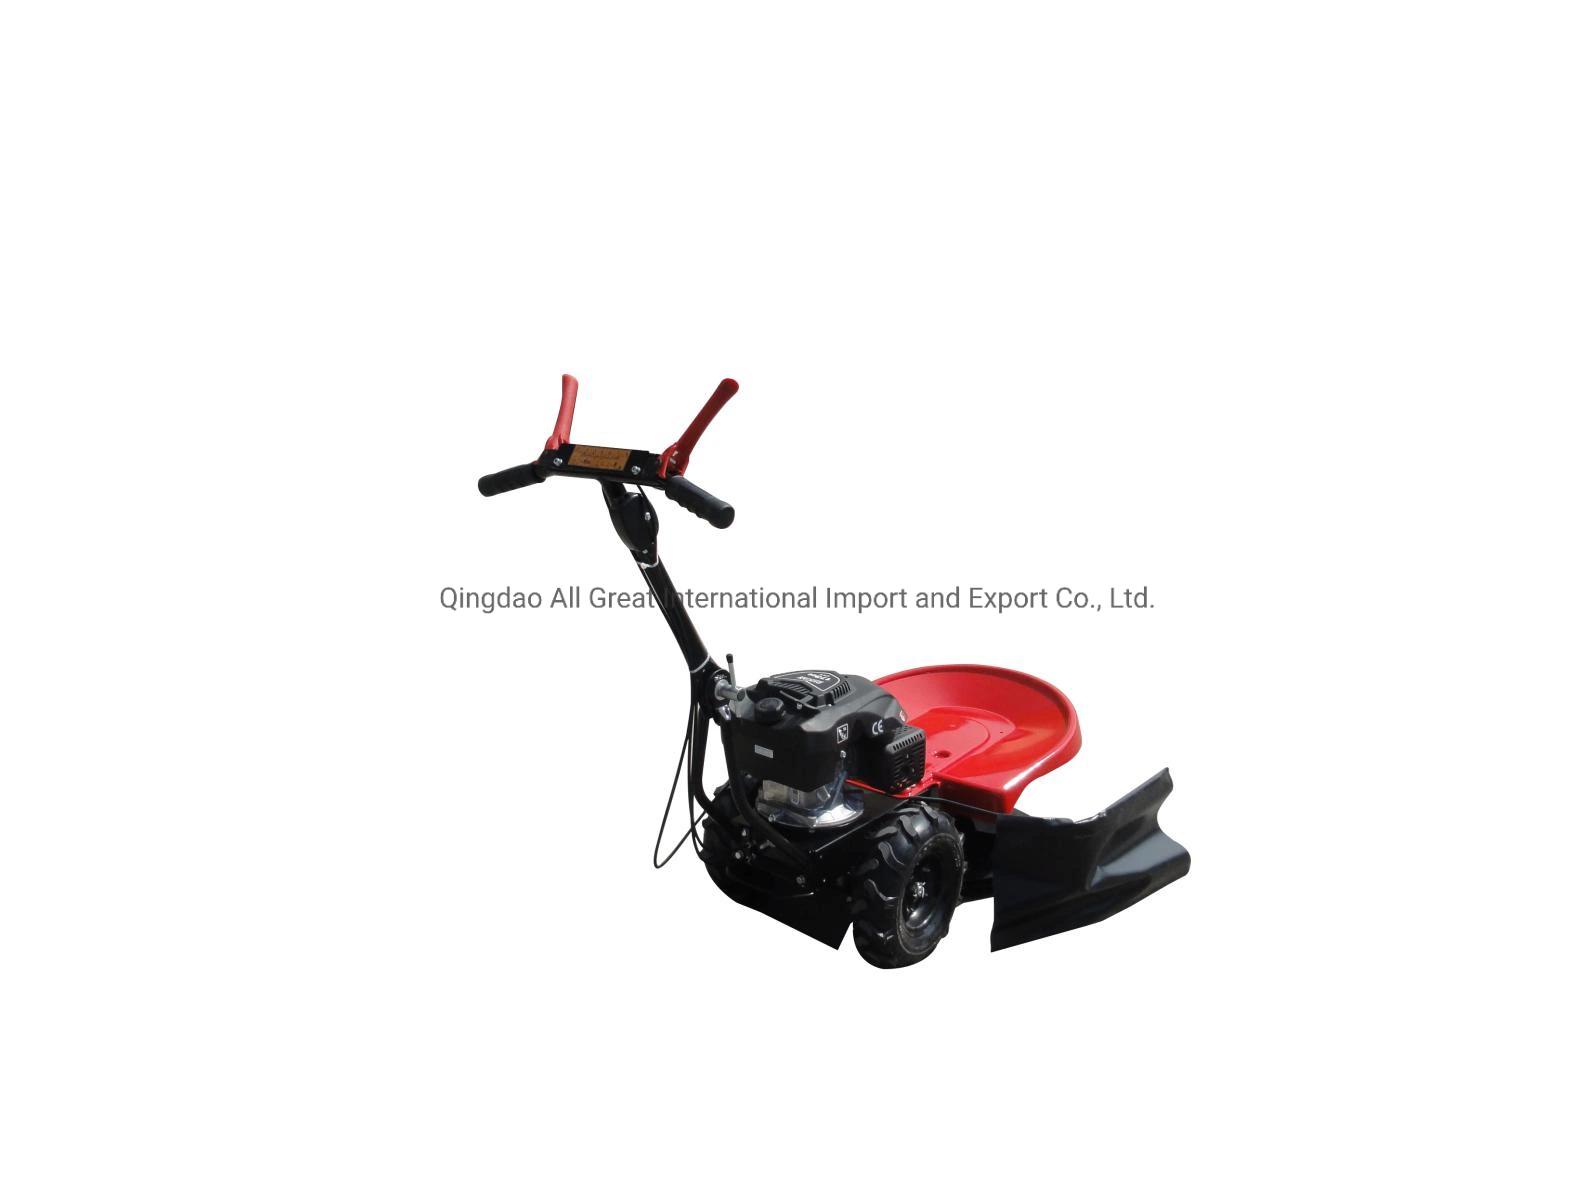 CE Certified Tractor Sickle Hydraulic Alfalfa Hay Mower Disc Garden Grass Cutting Machine Agricultural Machinery Grass Trimmer Reciprocating Disk Lawn Mower